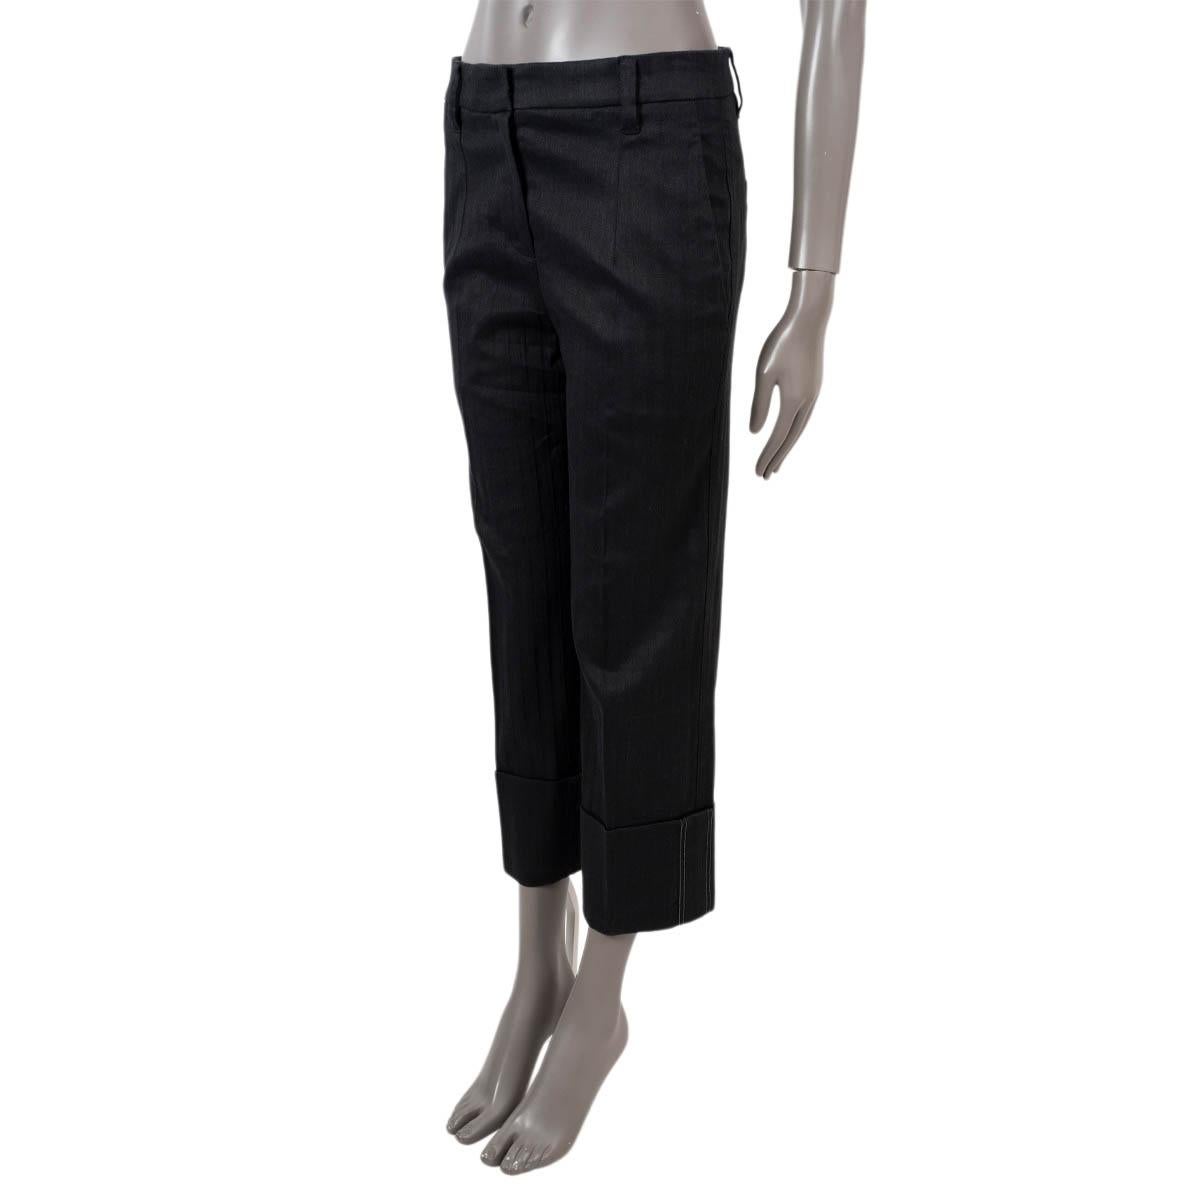 100% authentic Brunello Cucinelli cuffed herringbone pants in anthracite cotton (50%), linen (49%) and elastane (1%). The design features Monili details on the cuffs, belt loops, side slit pockets and back pockets. Unlined. Have been worn and are in